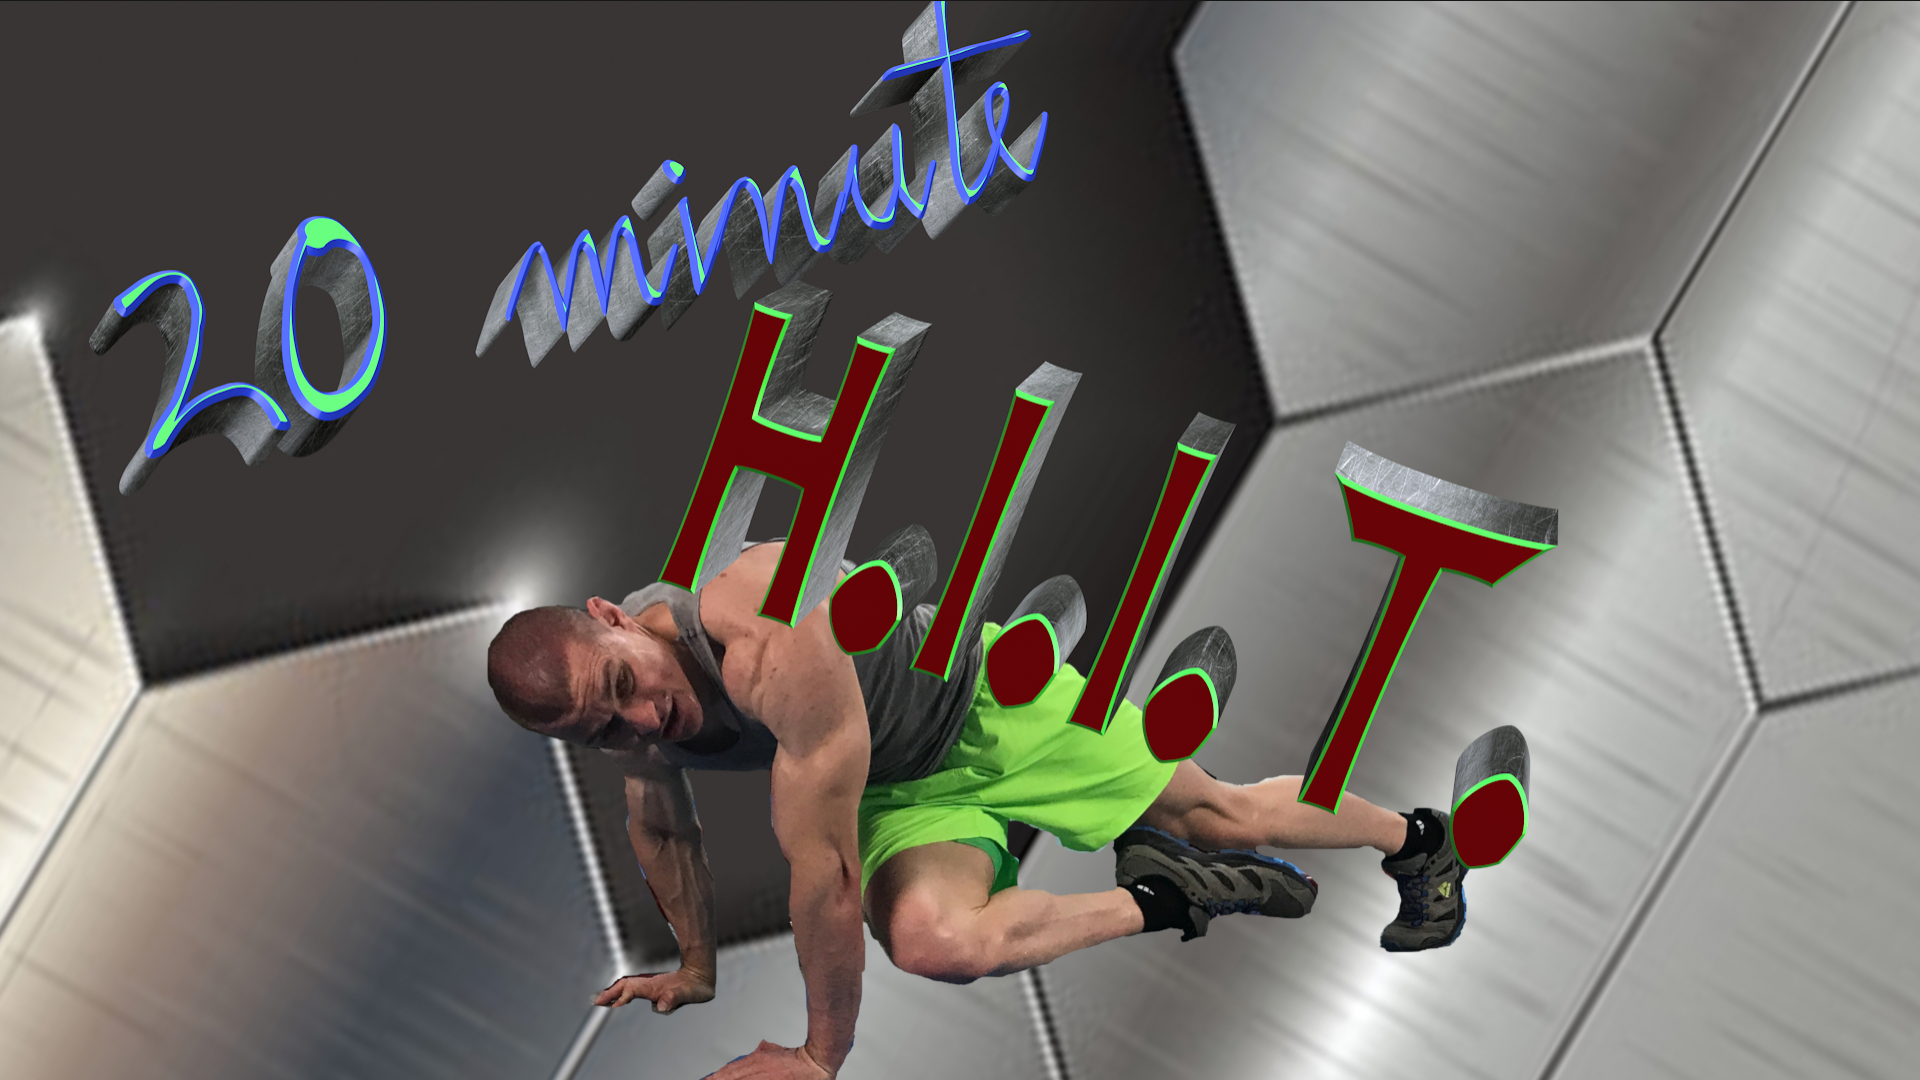 relentless tuesday hiit 20 minute workout